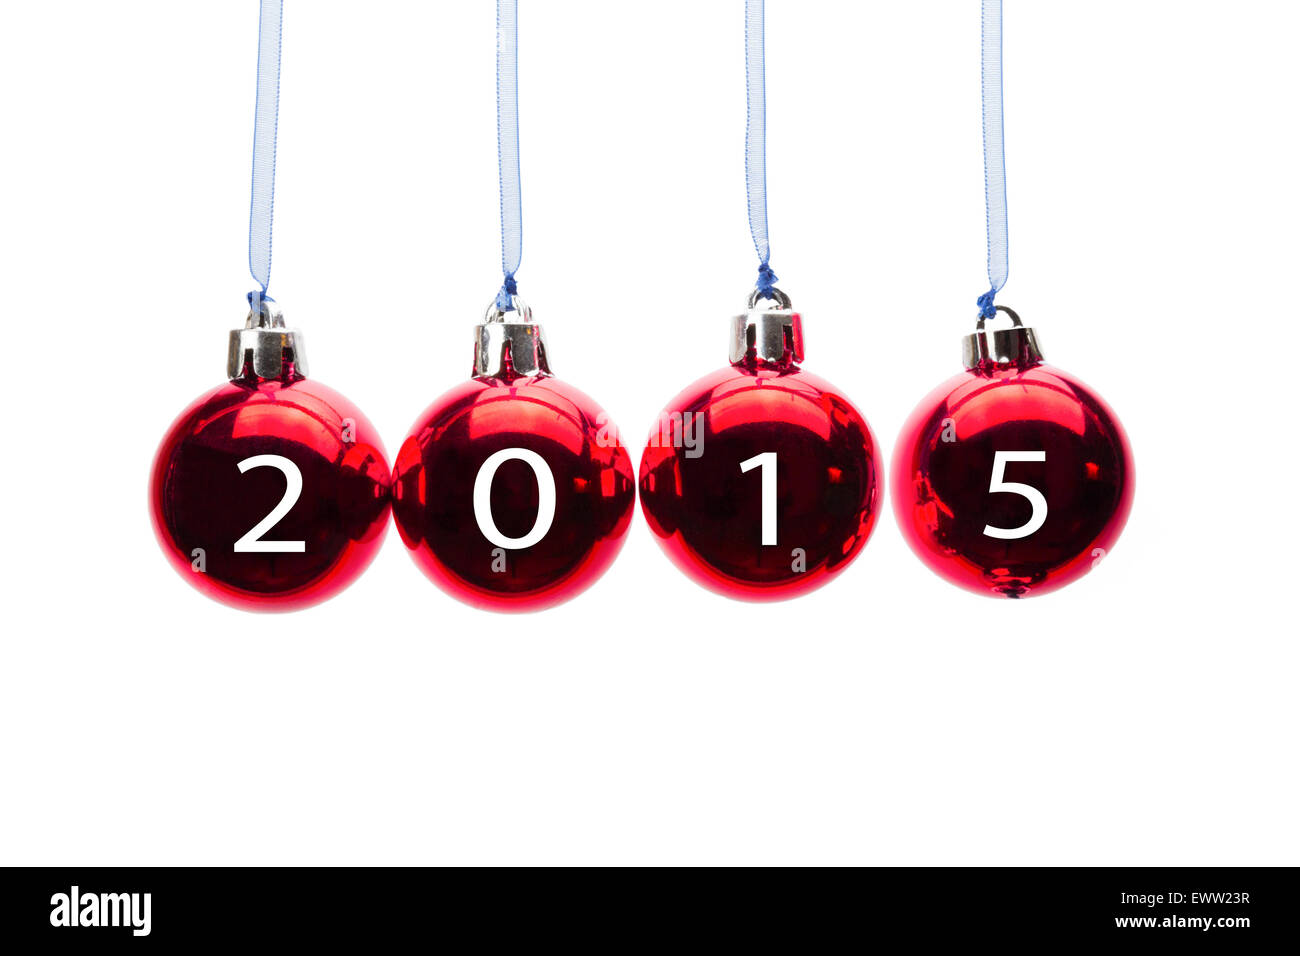 Four red christmas balls with numbers of old year 2015 isolated on white background Stock Photo